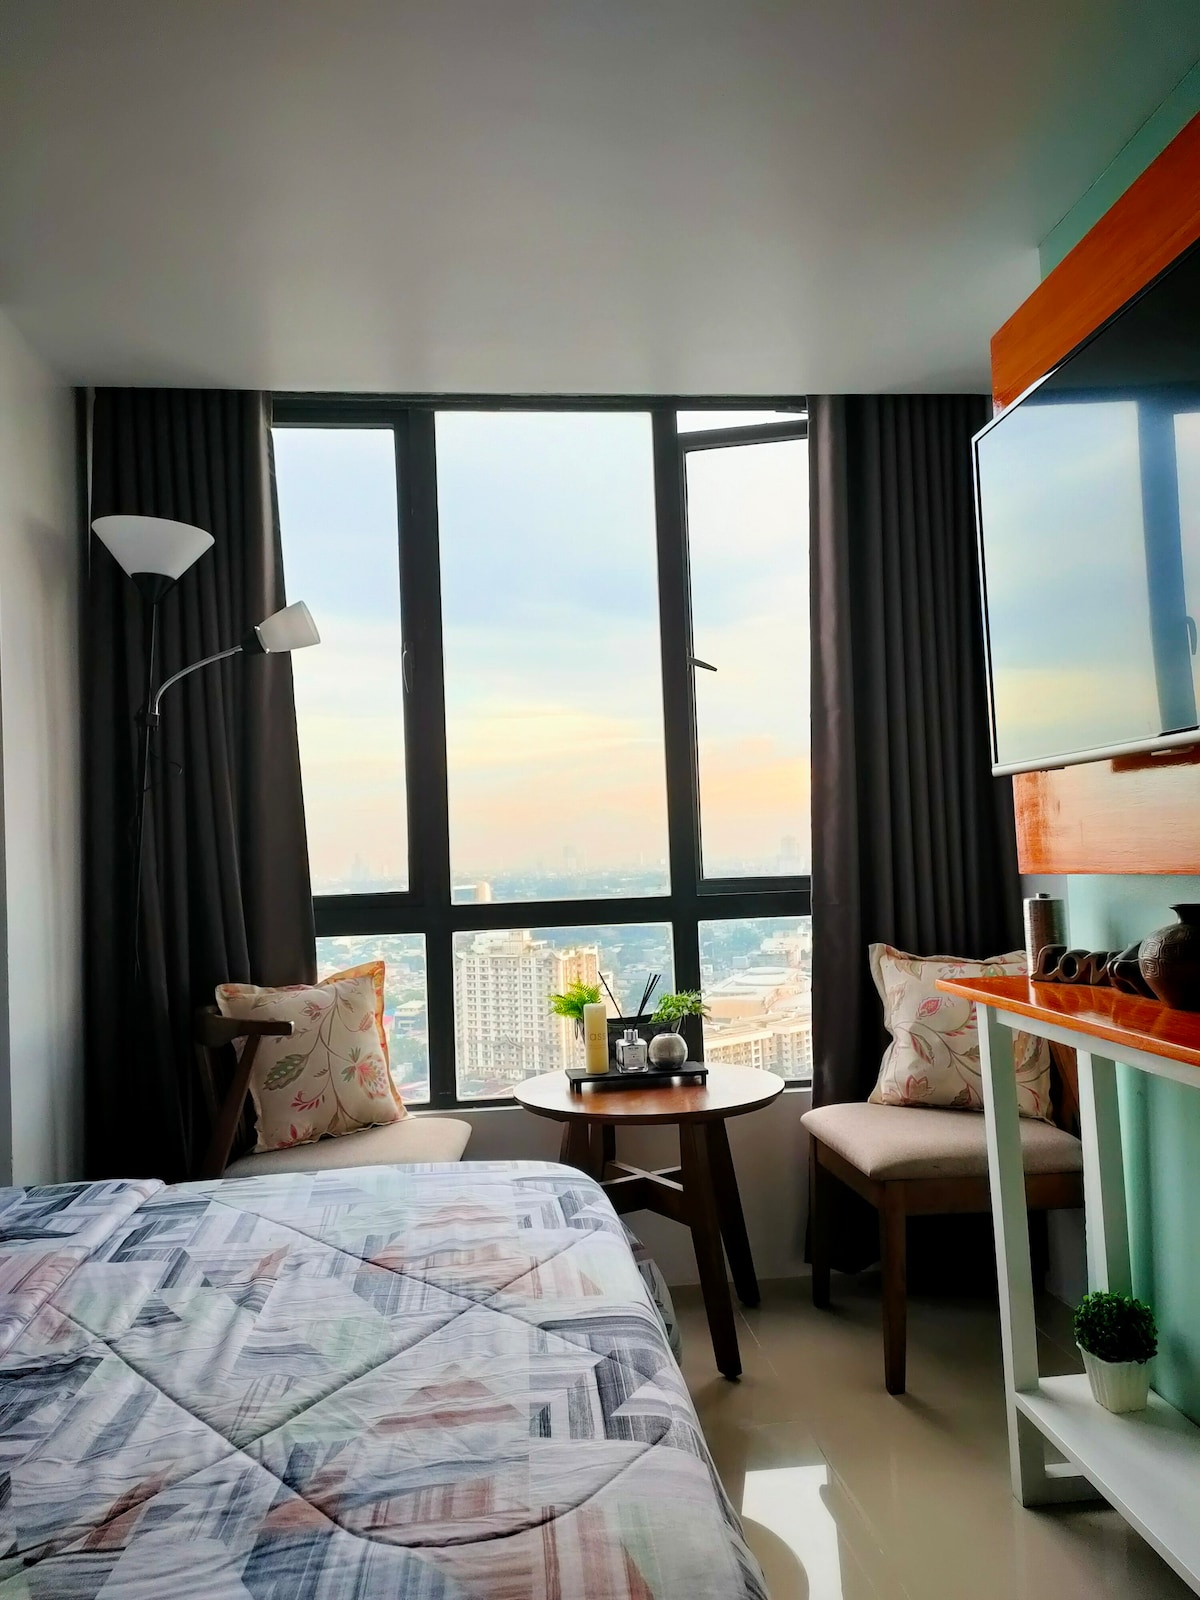 INSTAGRAMABLE ROOM CITY VIEW IN QC.